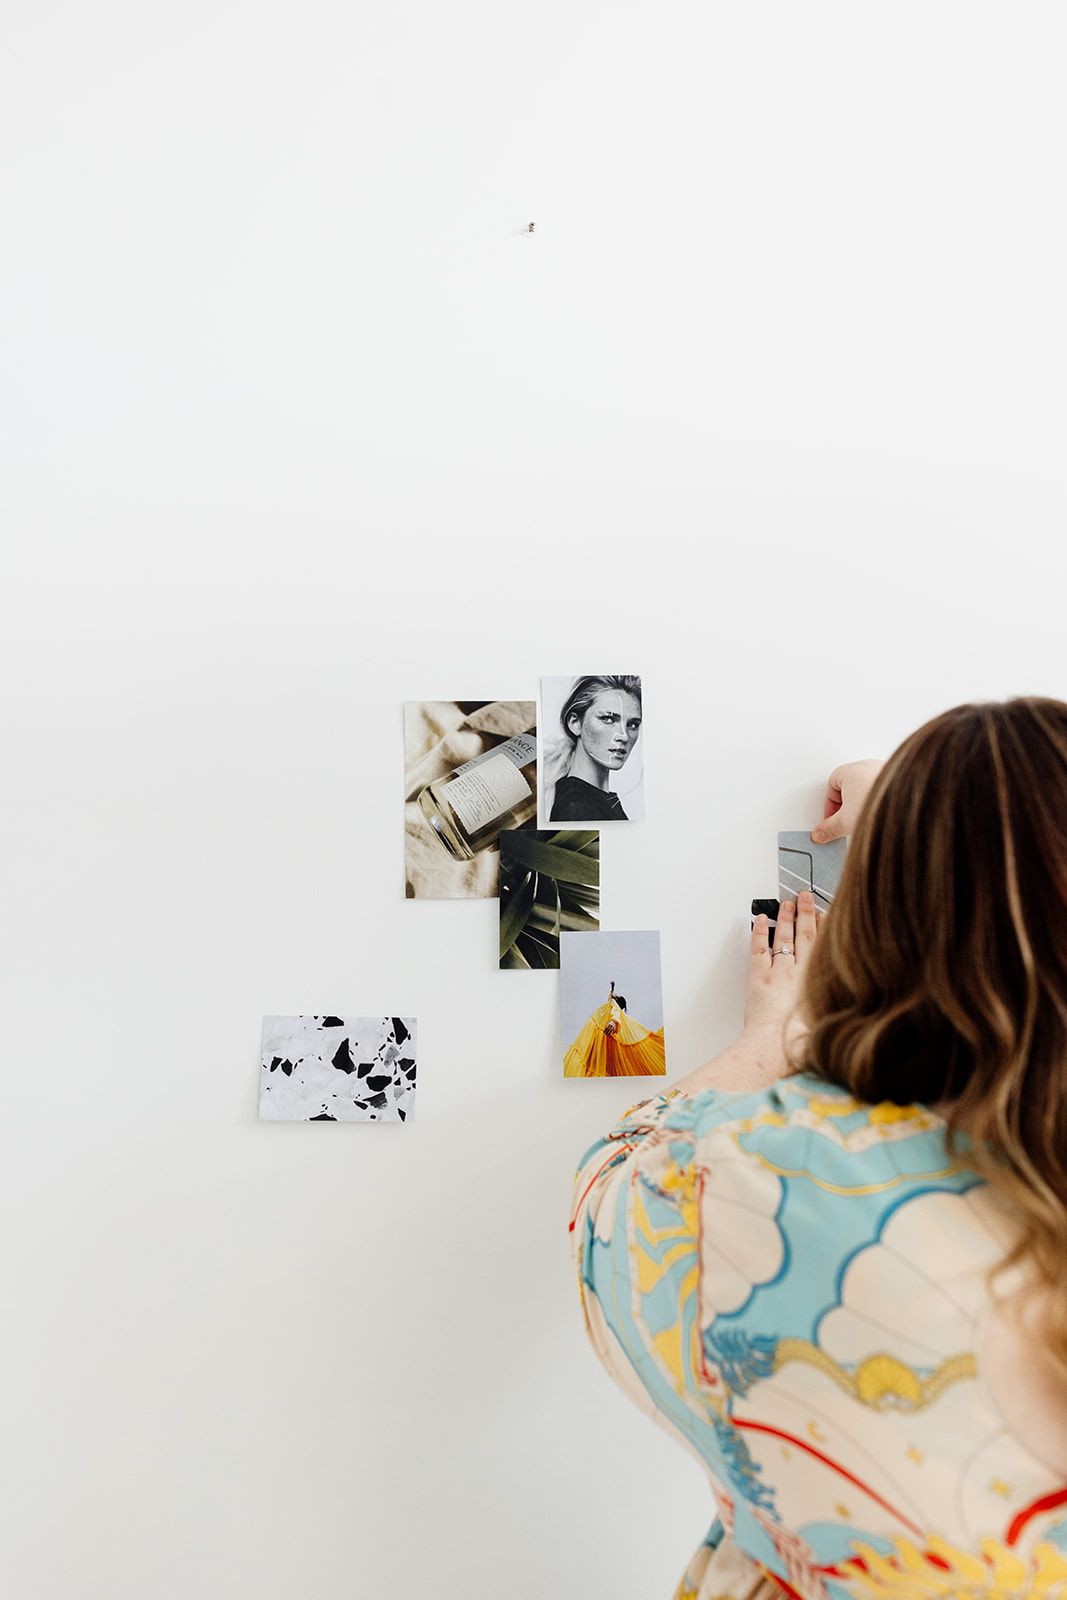 Image of a female creative entrepreneur creating a moodboard on a white wall with photographs, wearing a bright patterned top.